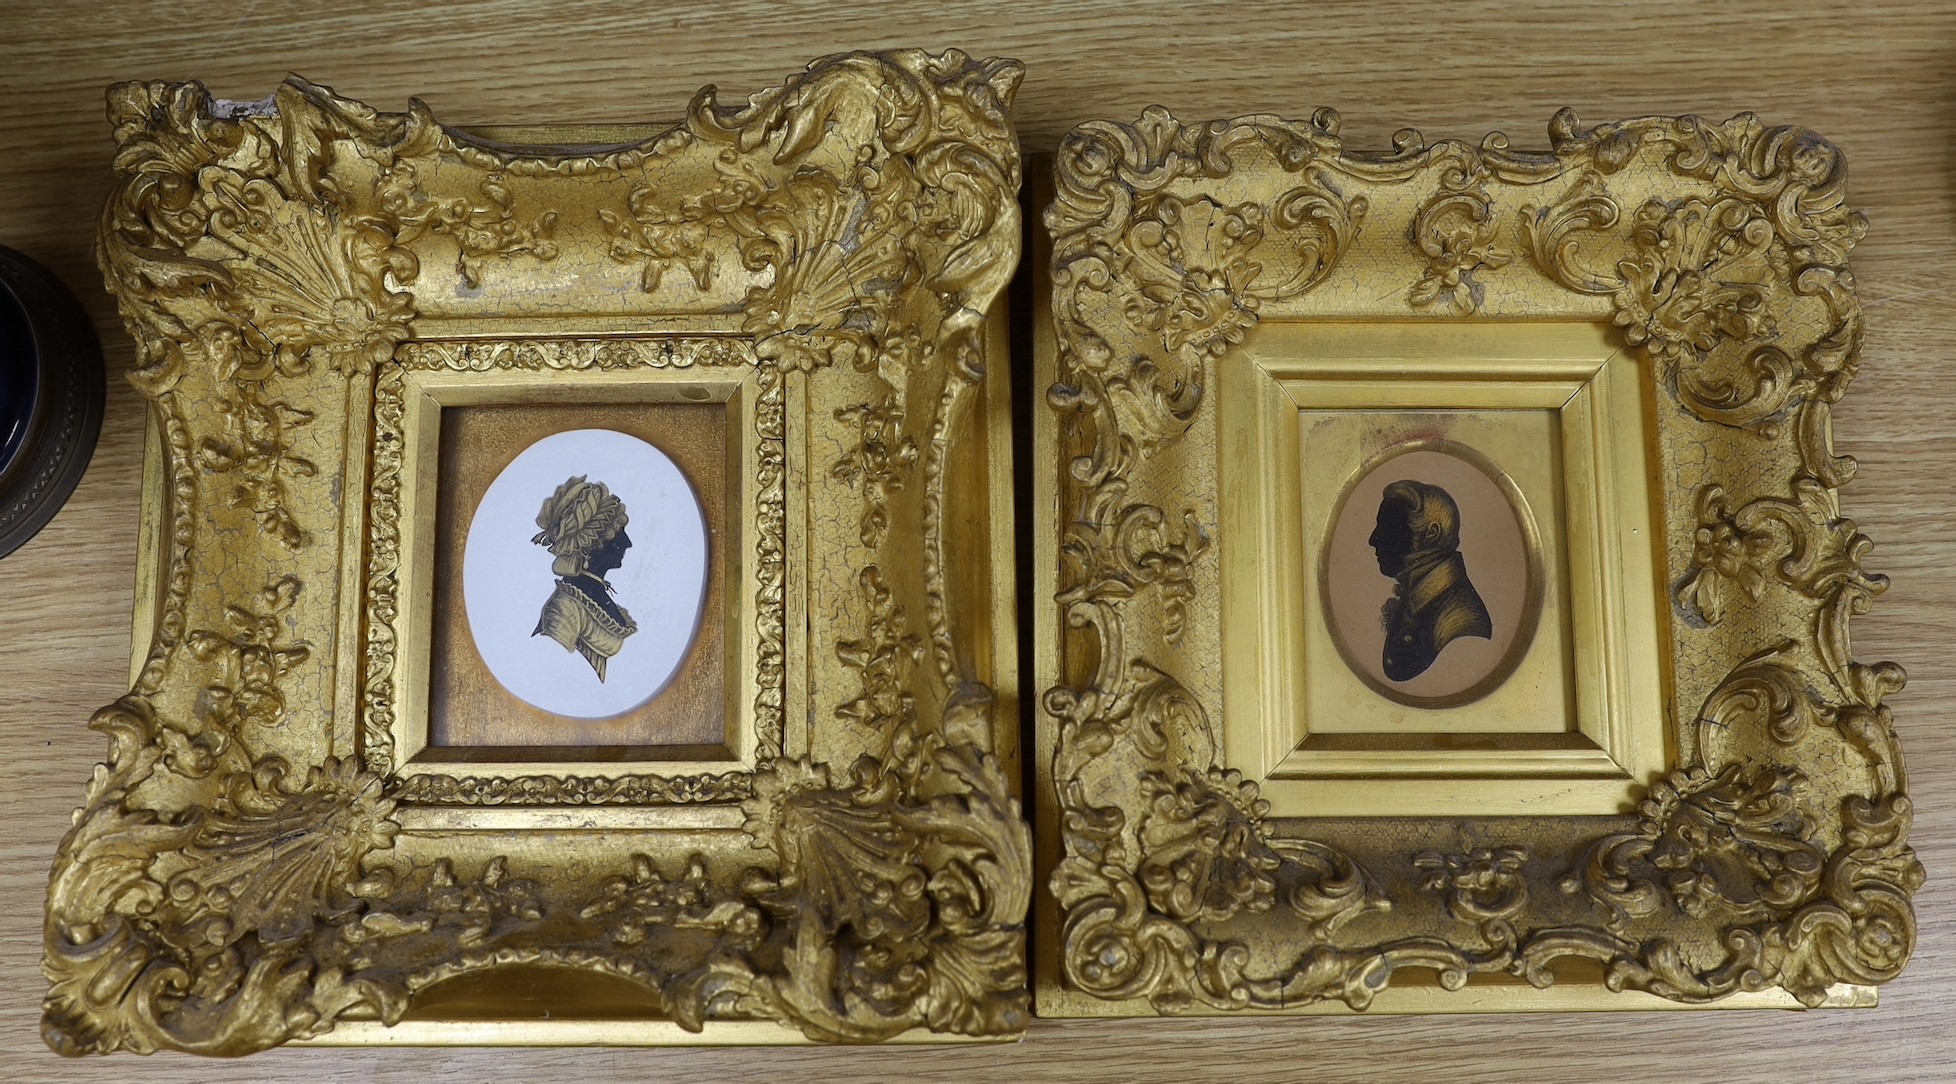 Two early 19th century bronzed and cut paper silhouettes, housed in ornate gilt gesso frames